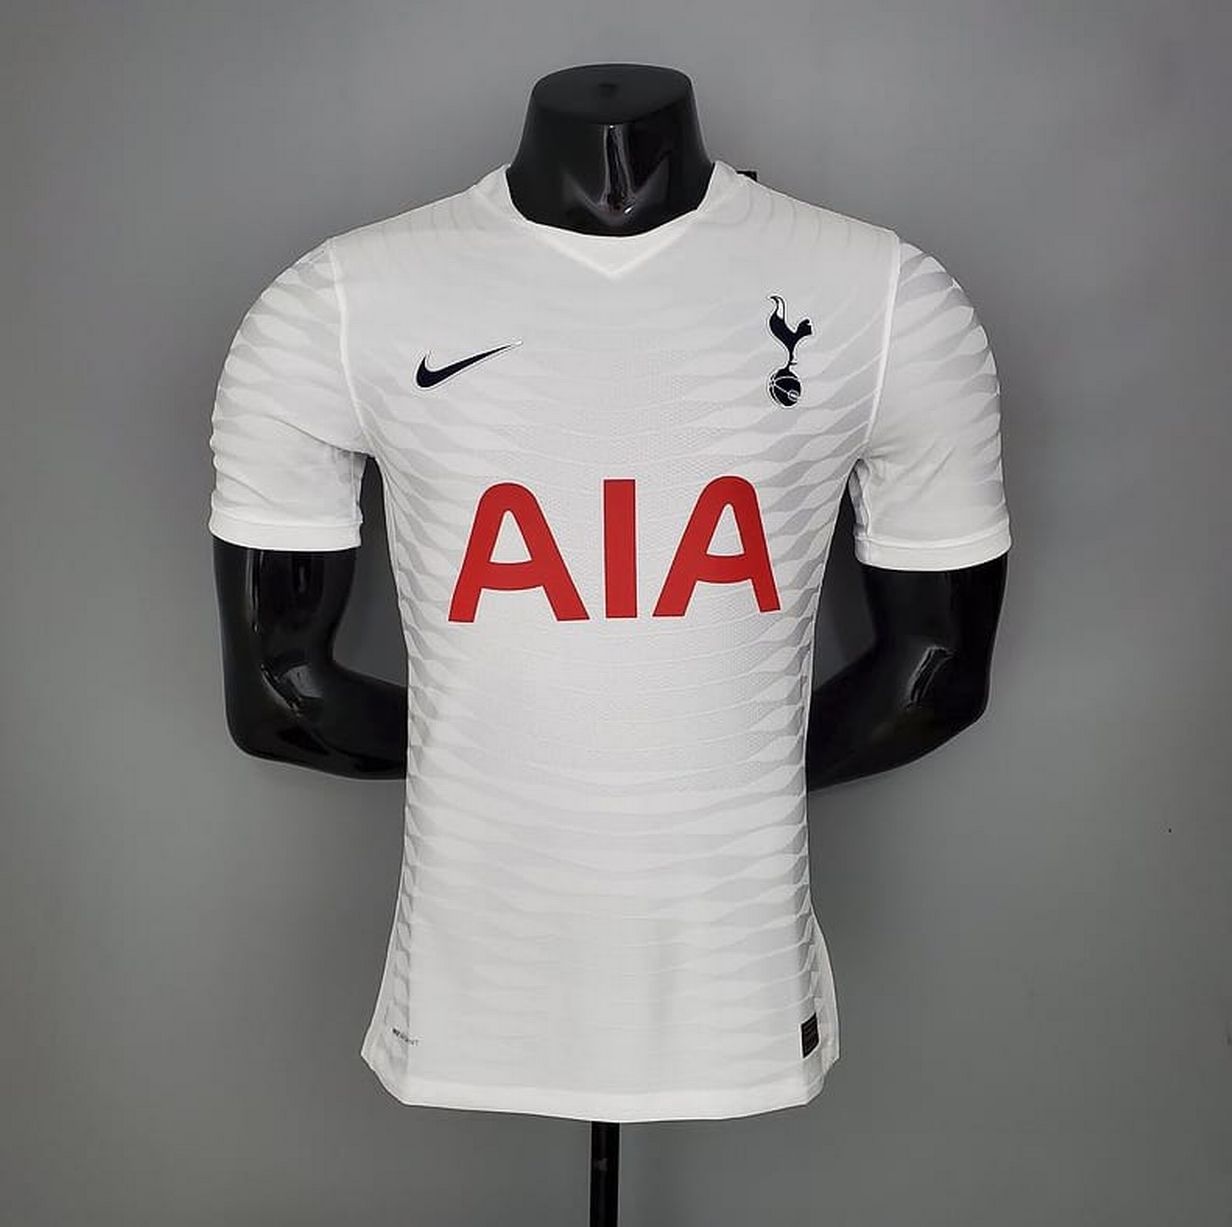 Tottenham Hotspur fans have been given a sneak peek at the new home kit that the players will unveil next week. The jersey in question is the 'elite' version of the 2021/22 Nike home jersey.